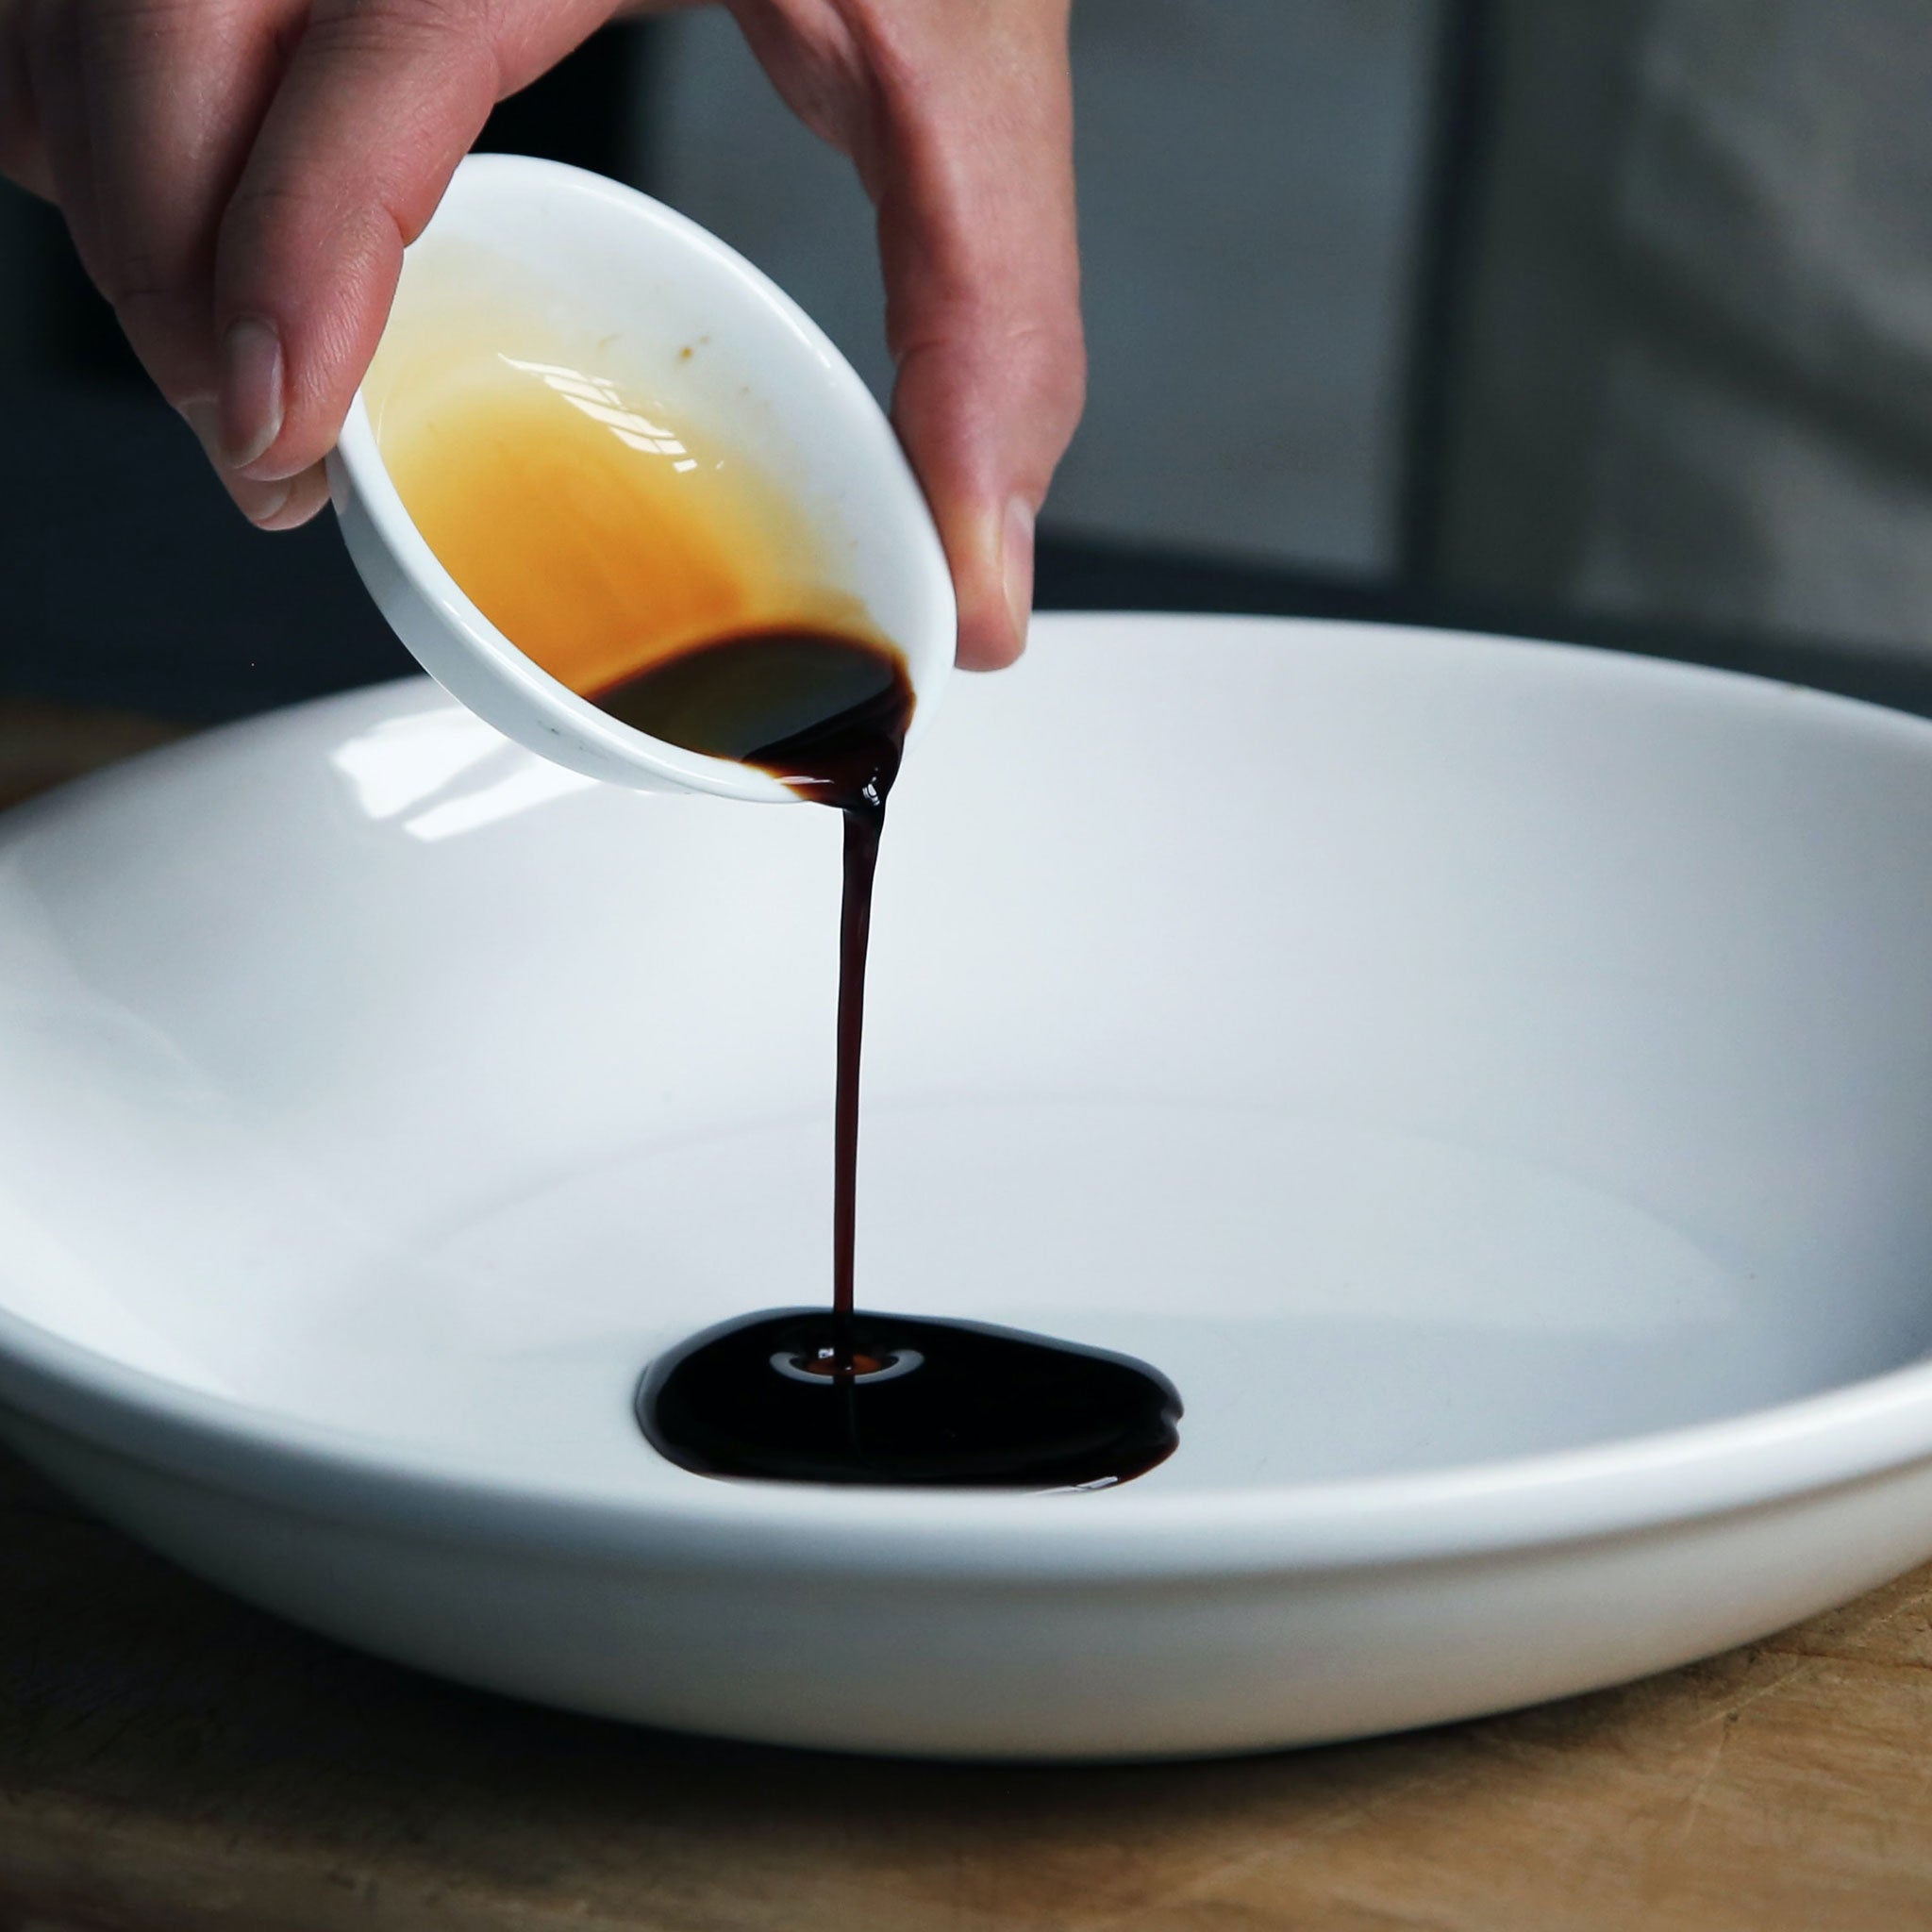 Espresso Balsamic from Italy